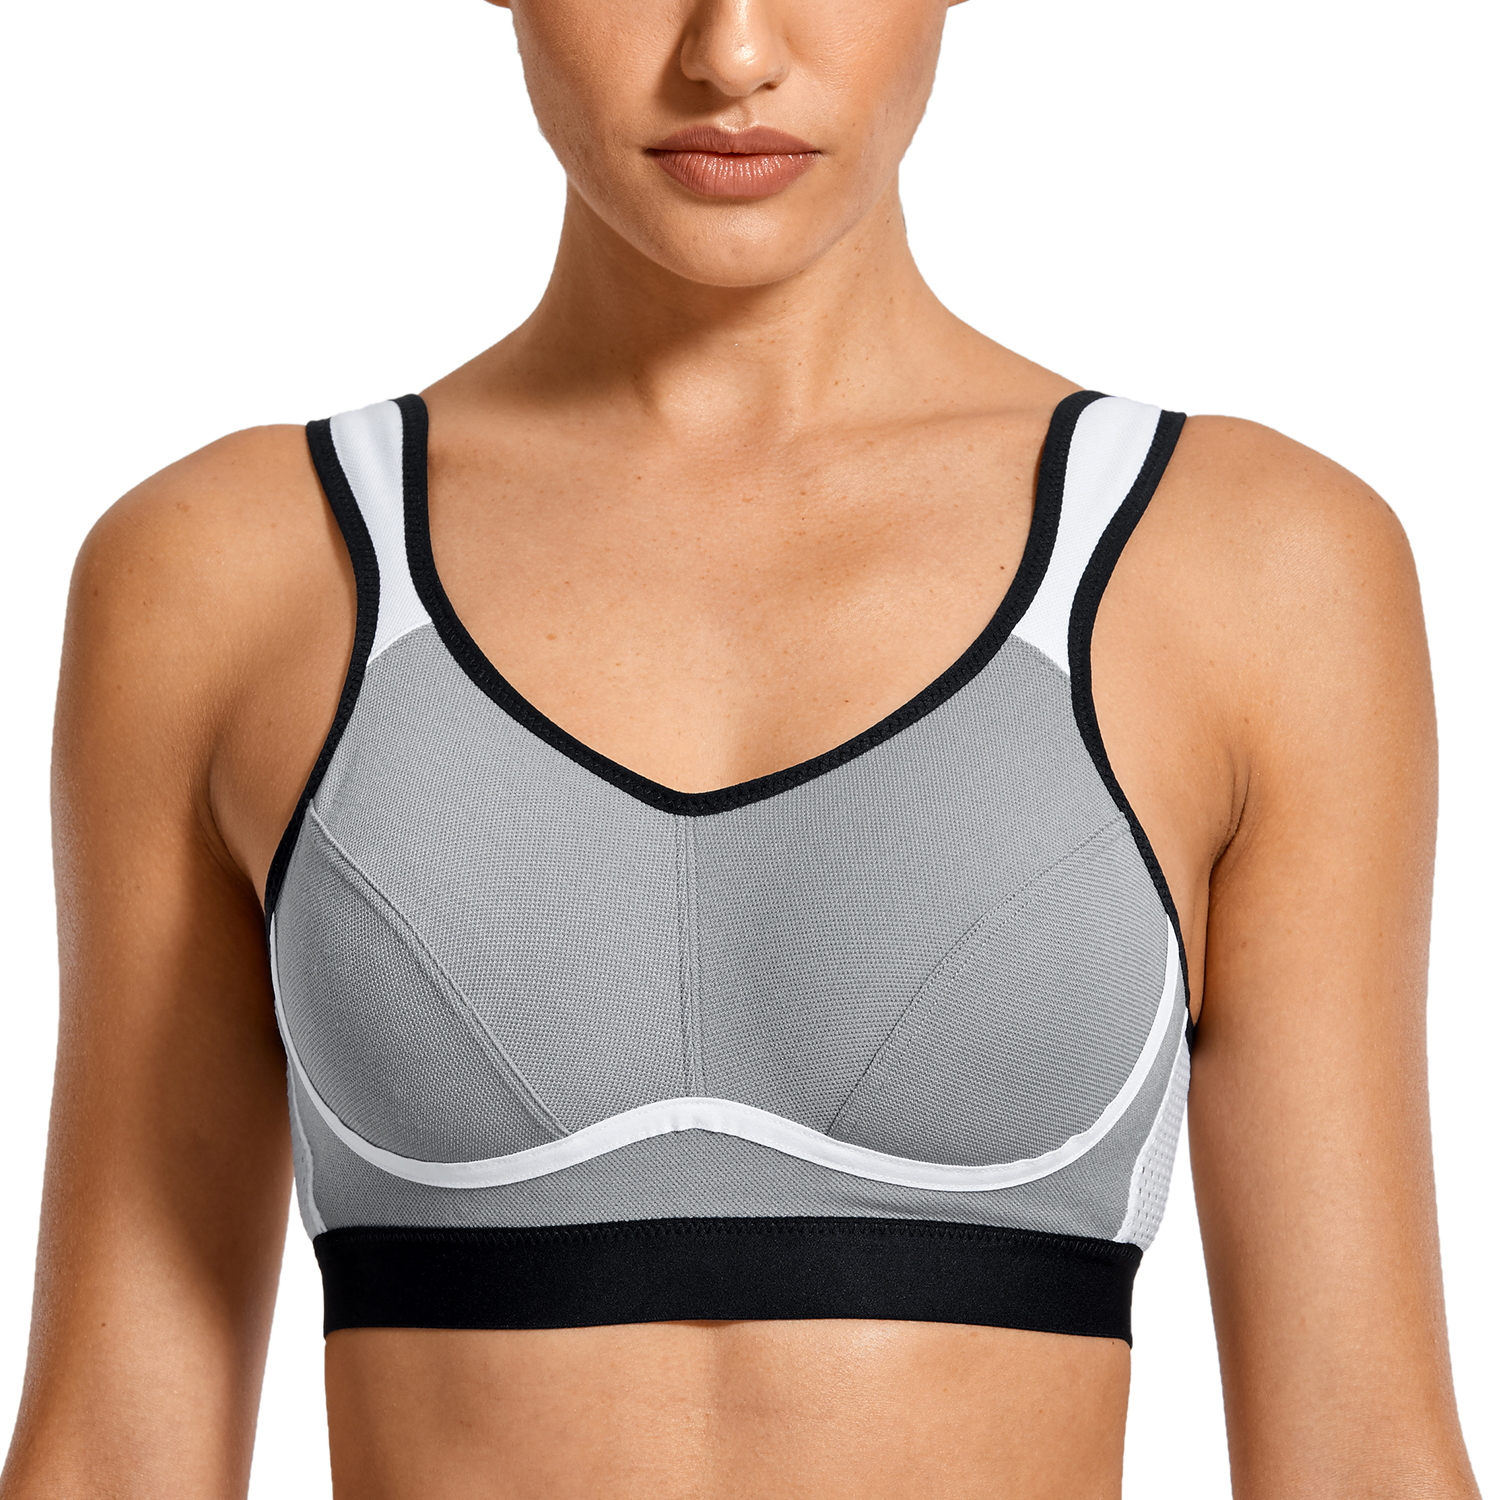 SYROKAN Women's High Impact Support Wirefree Bounce Control Plus Size  Workout Sports Bra Slated 38C,  price tracker / tracking,   price history charts,  price watches,  price drop alerts